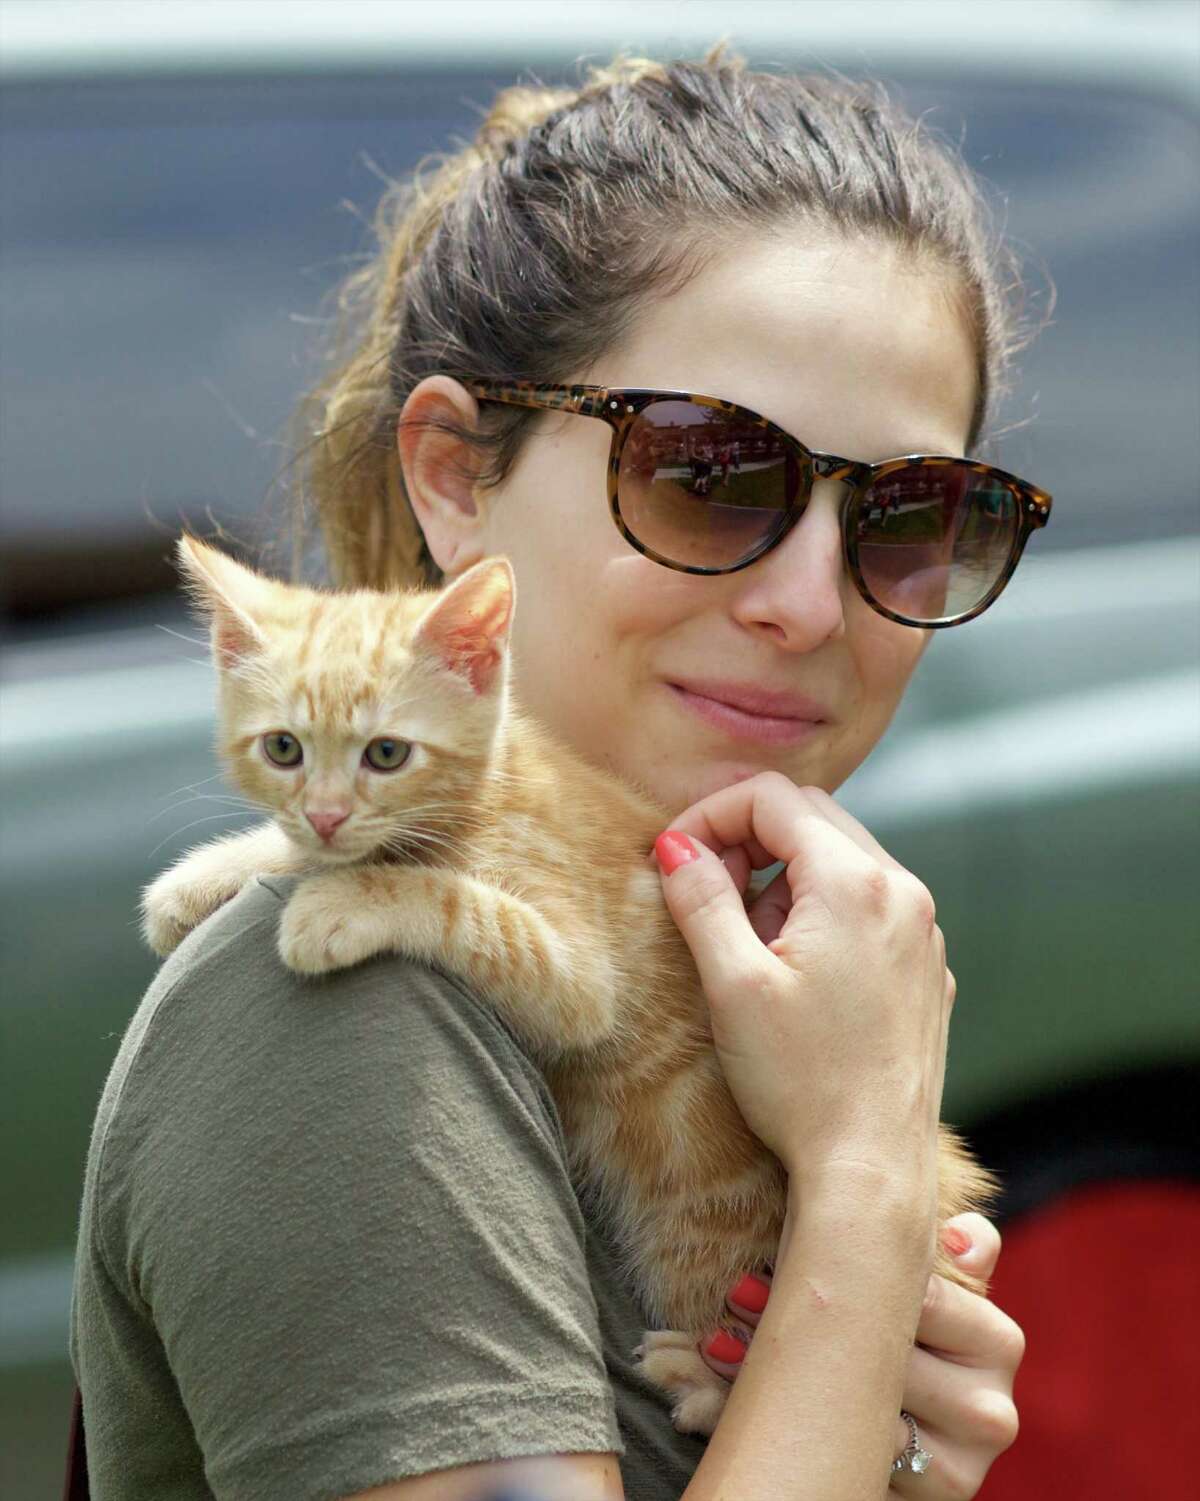 Rebecca Krewalk, from New Milford, takes a shine to "Peaches", a kitten that is up for adoption from the Wells Valley Cat Sanctuary on Wells Road in New Milford, CT. The 20th annual Teddy Bear Festival hosted by the Woman?’s Club of Greater New Milford took place on the town green on Saturday, June 4th from 10 to 3.